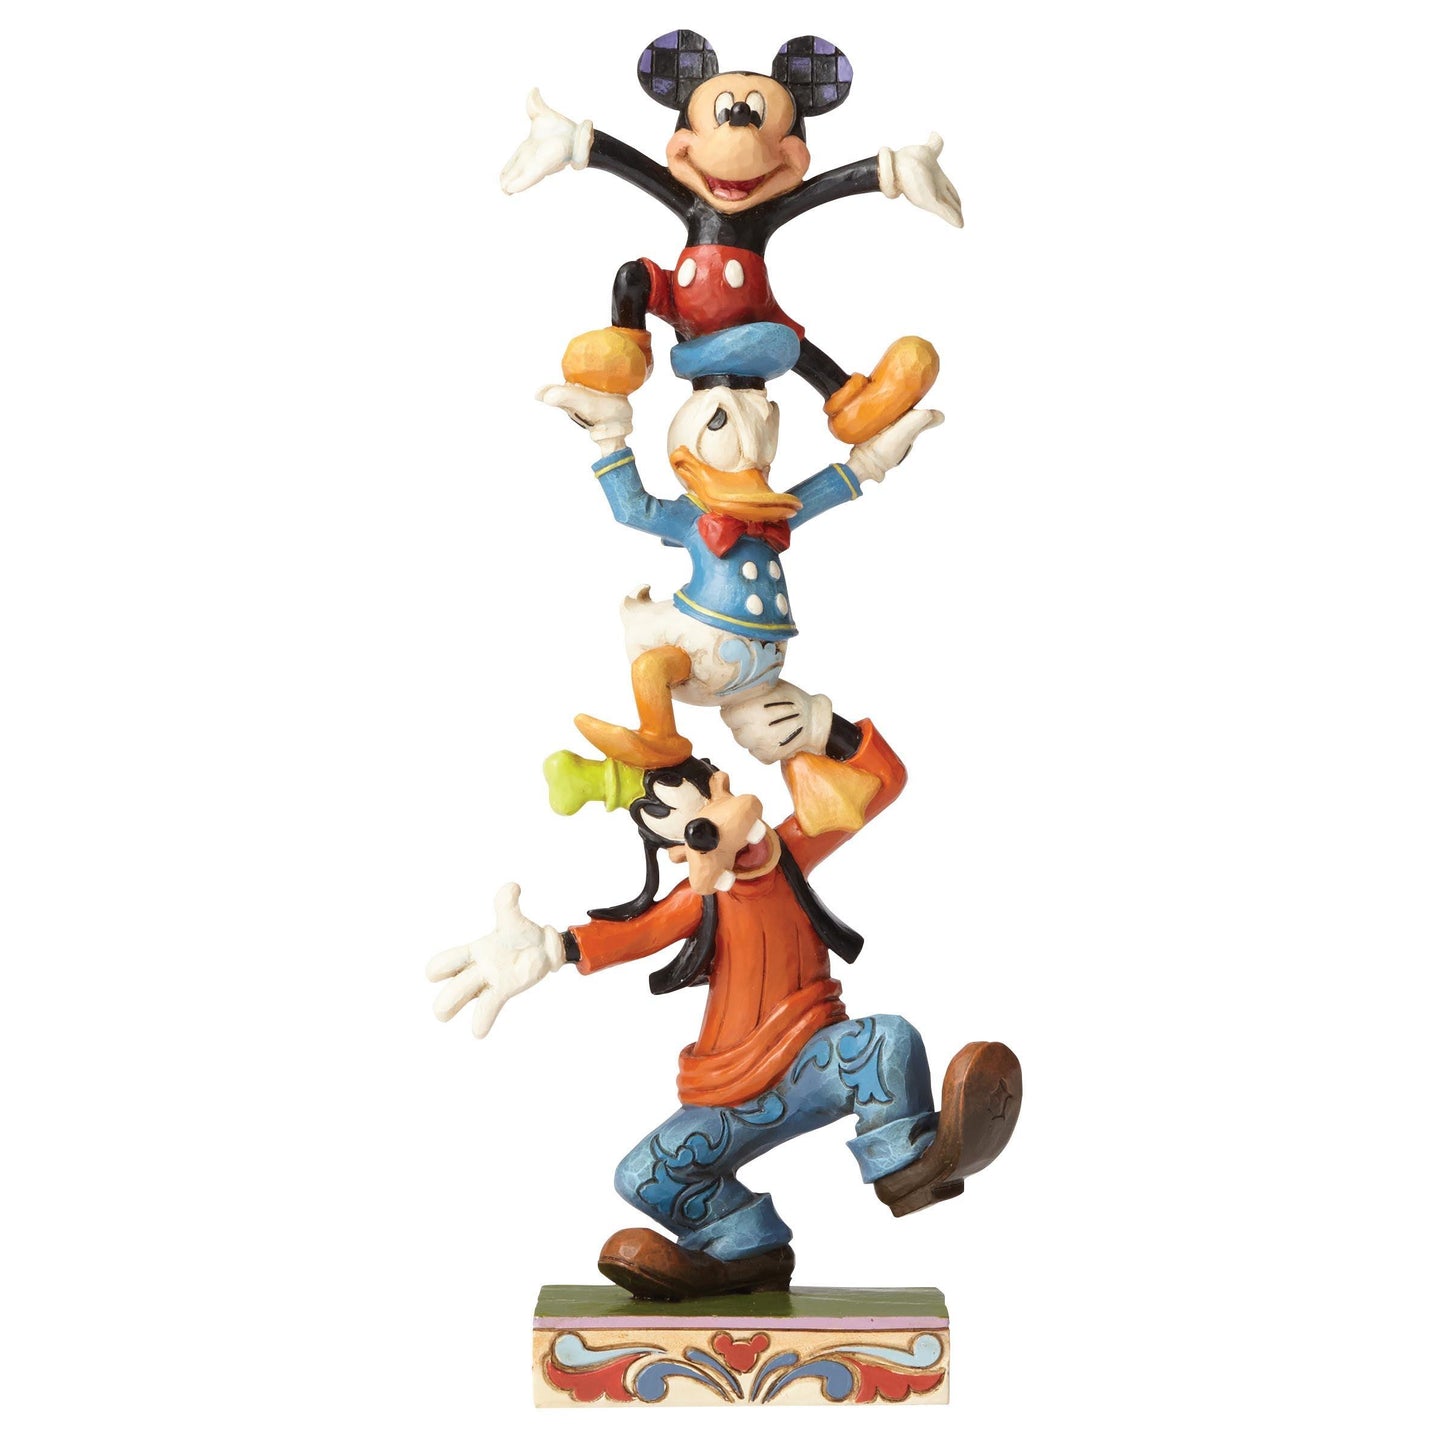 Teetering Tower (Goofy, Donald Duck and Mickey Mouse Figurine) (Disney Traditions by Jim Shore) - Gallery Gifts Online 